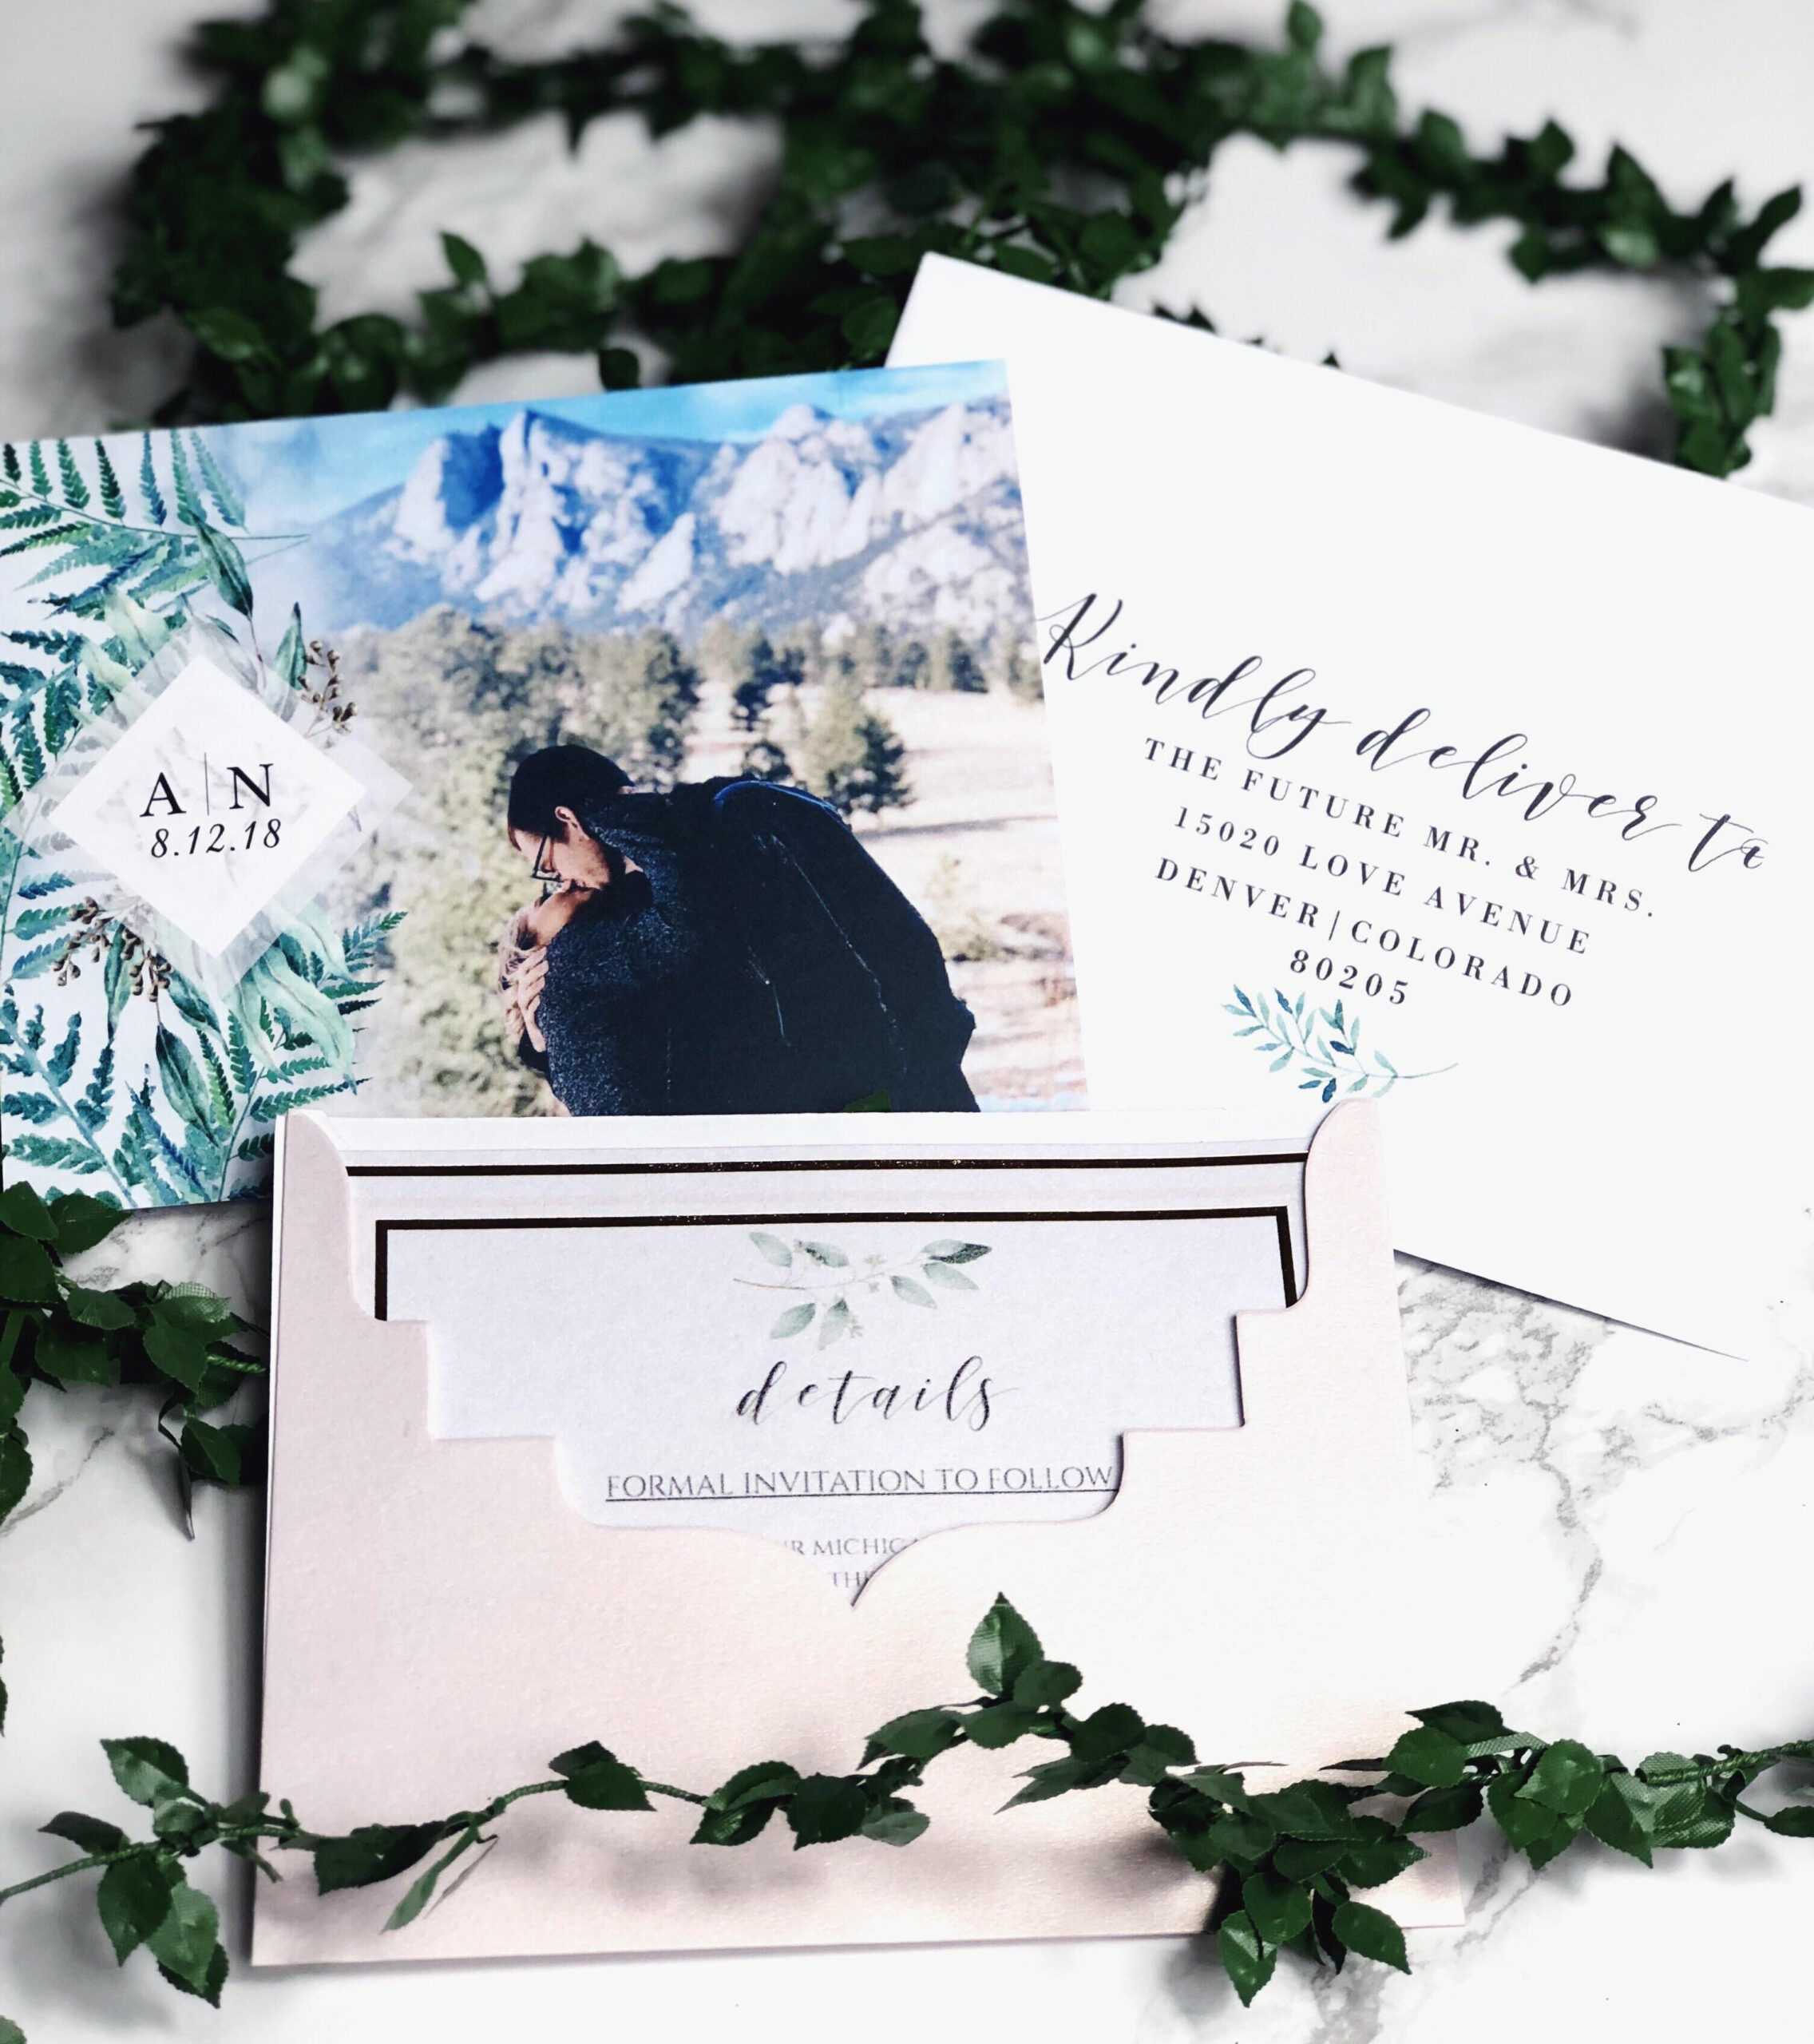 Our Save The Dates! Photo From Vistaprint, Envelope With Regard To Michaels Place Card Template